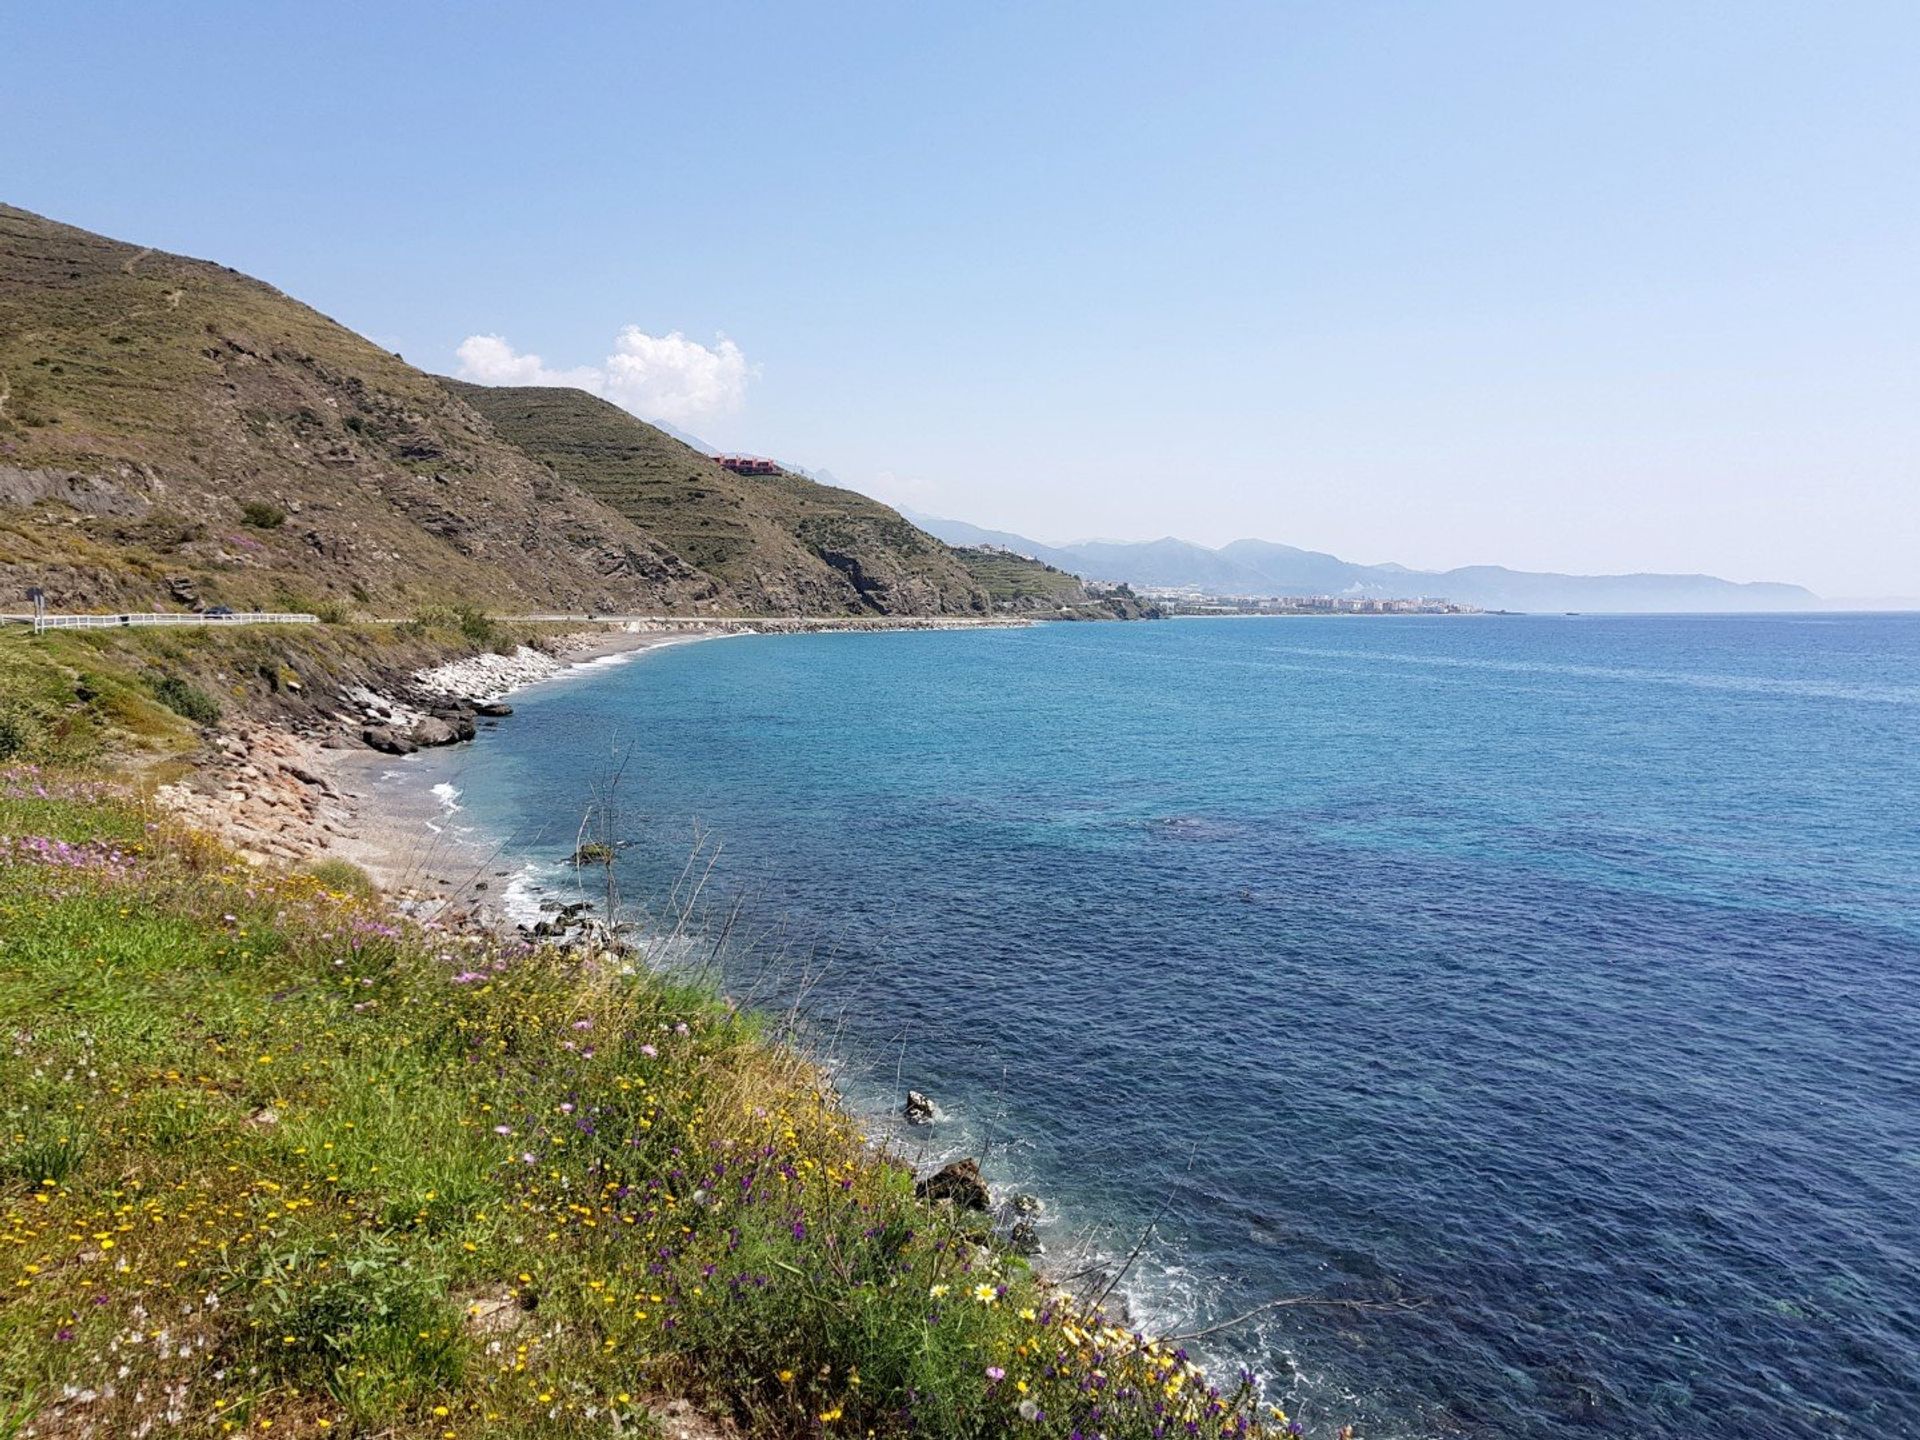 There are plenty secluded small beaches along Torrox's coastline, perfect for a refreshing swim in crystal clear waters